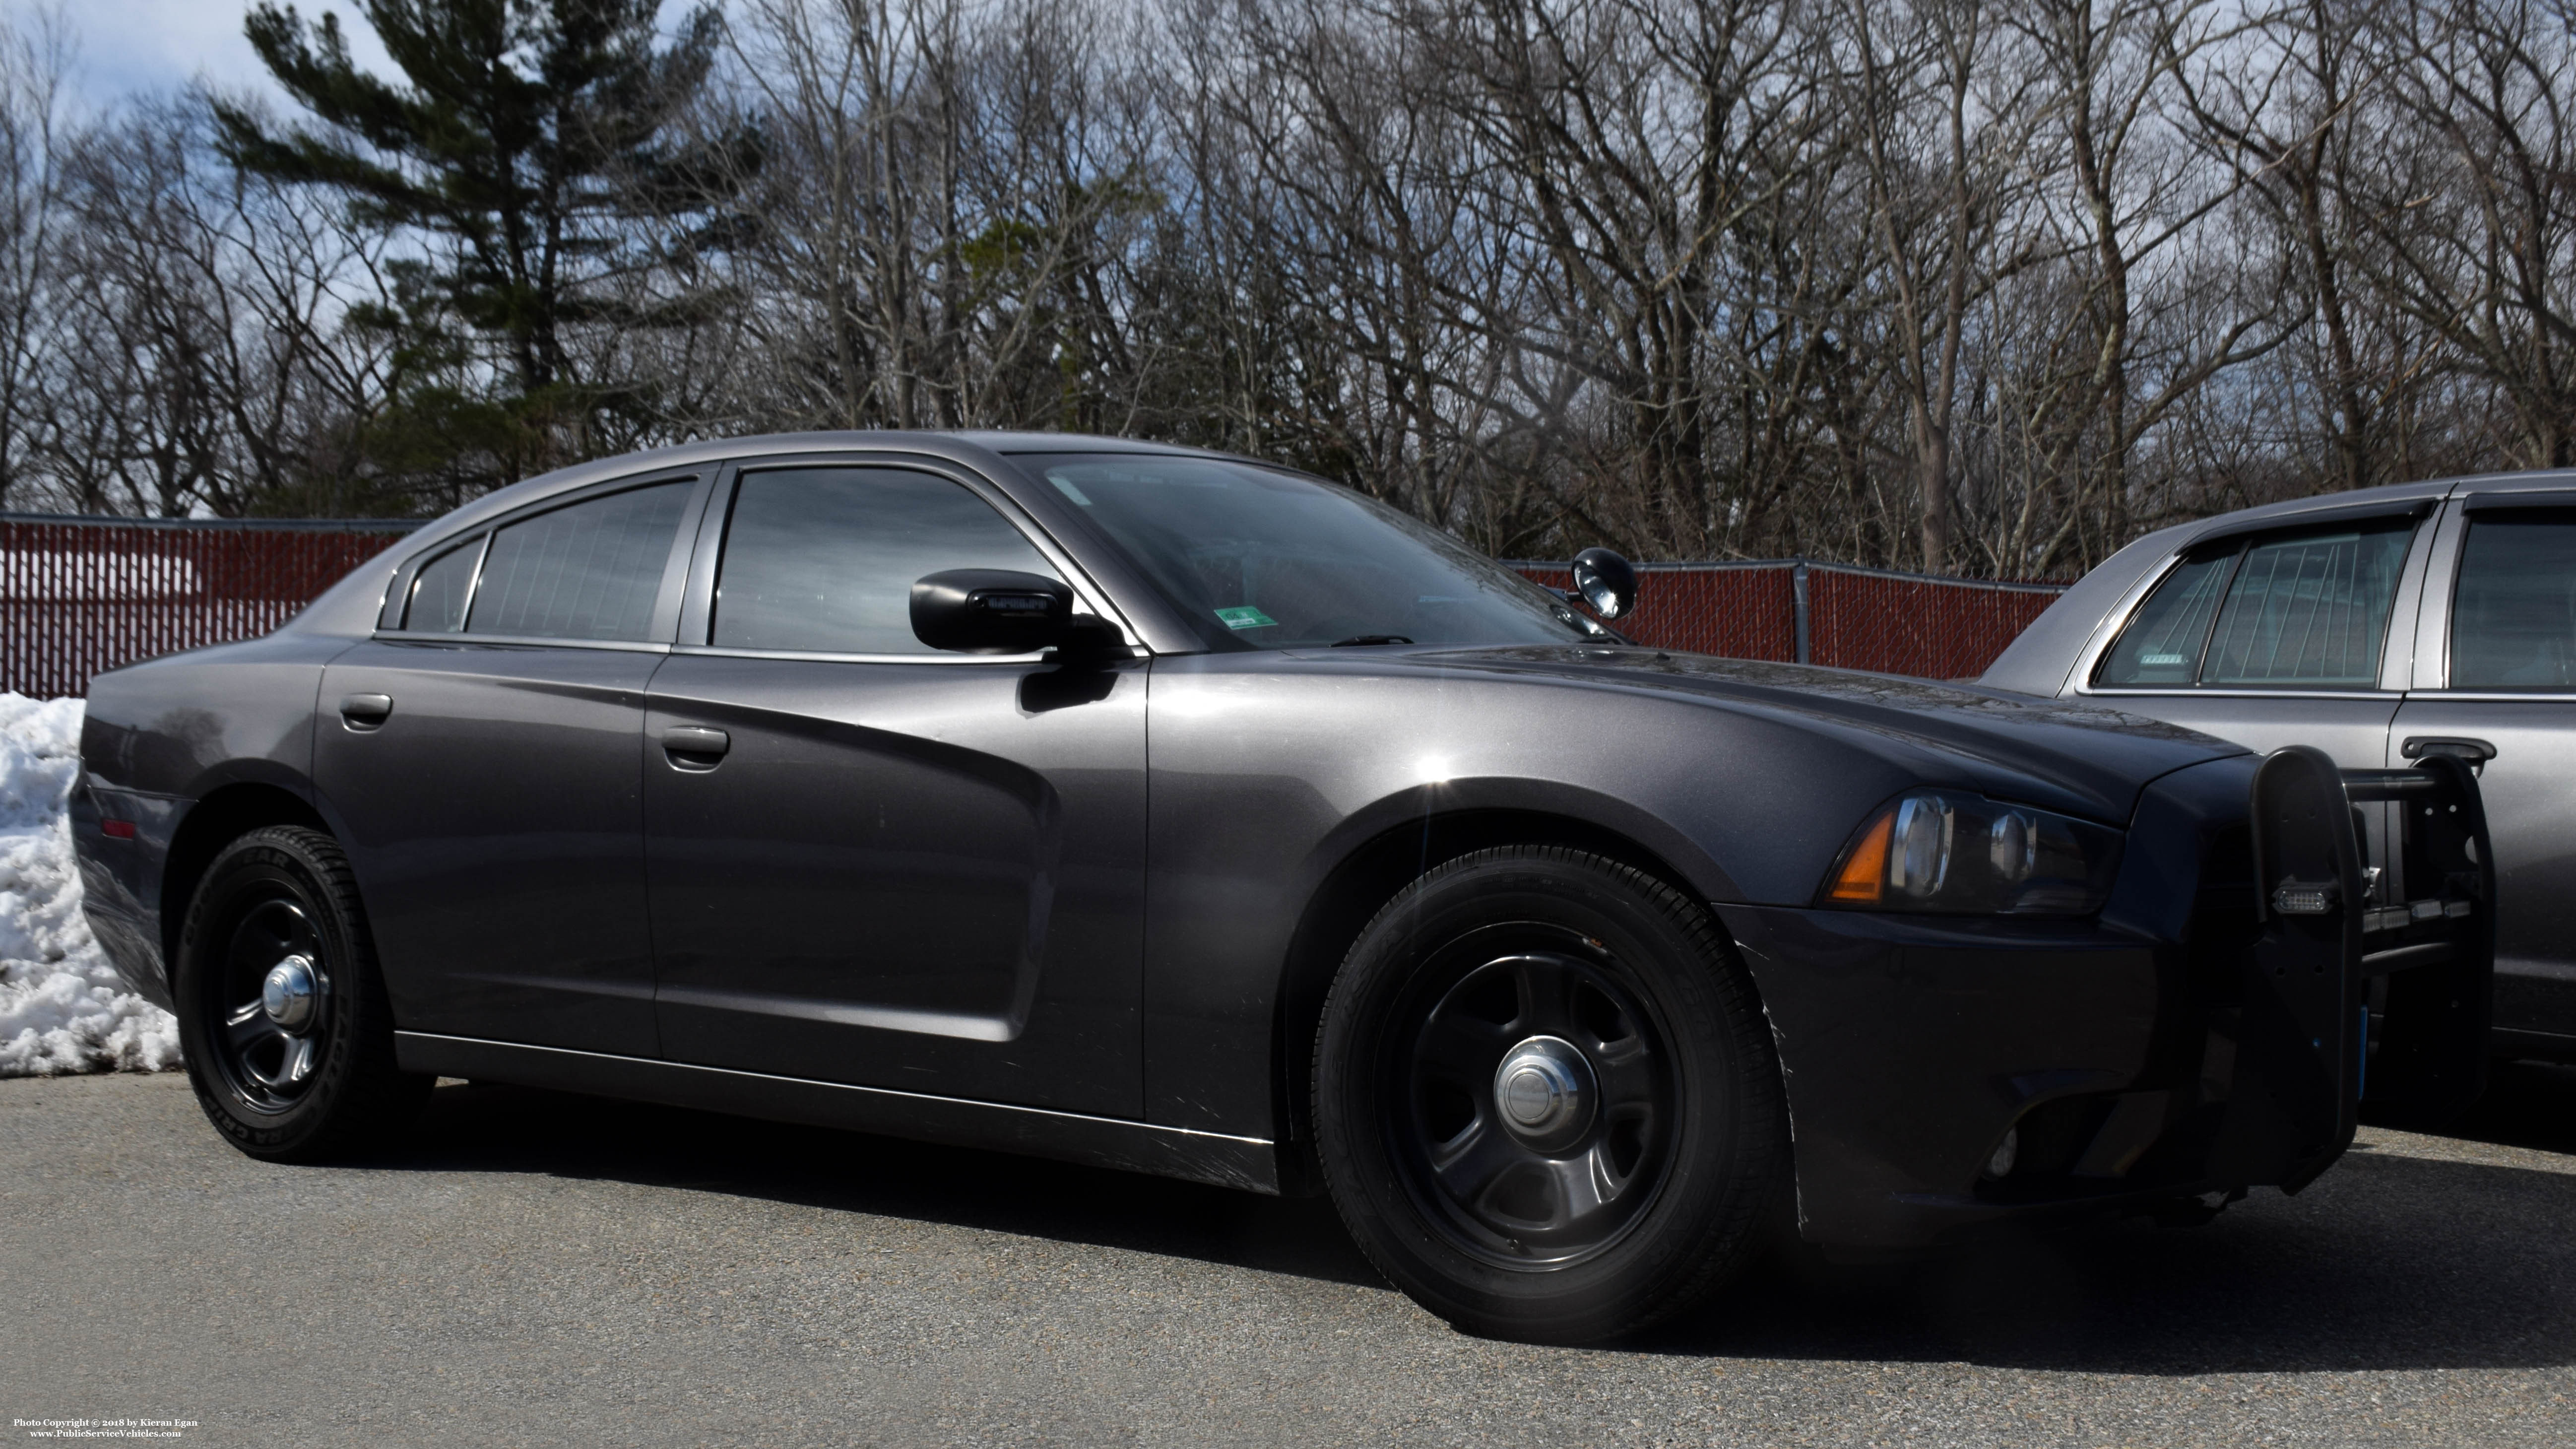 A photo  of North Smithfield Police
            Cruiser 206, a 2011 Dodge Charger             taken by Kieran Egan